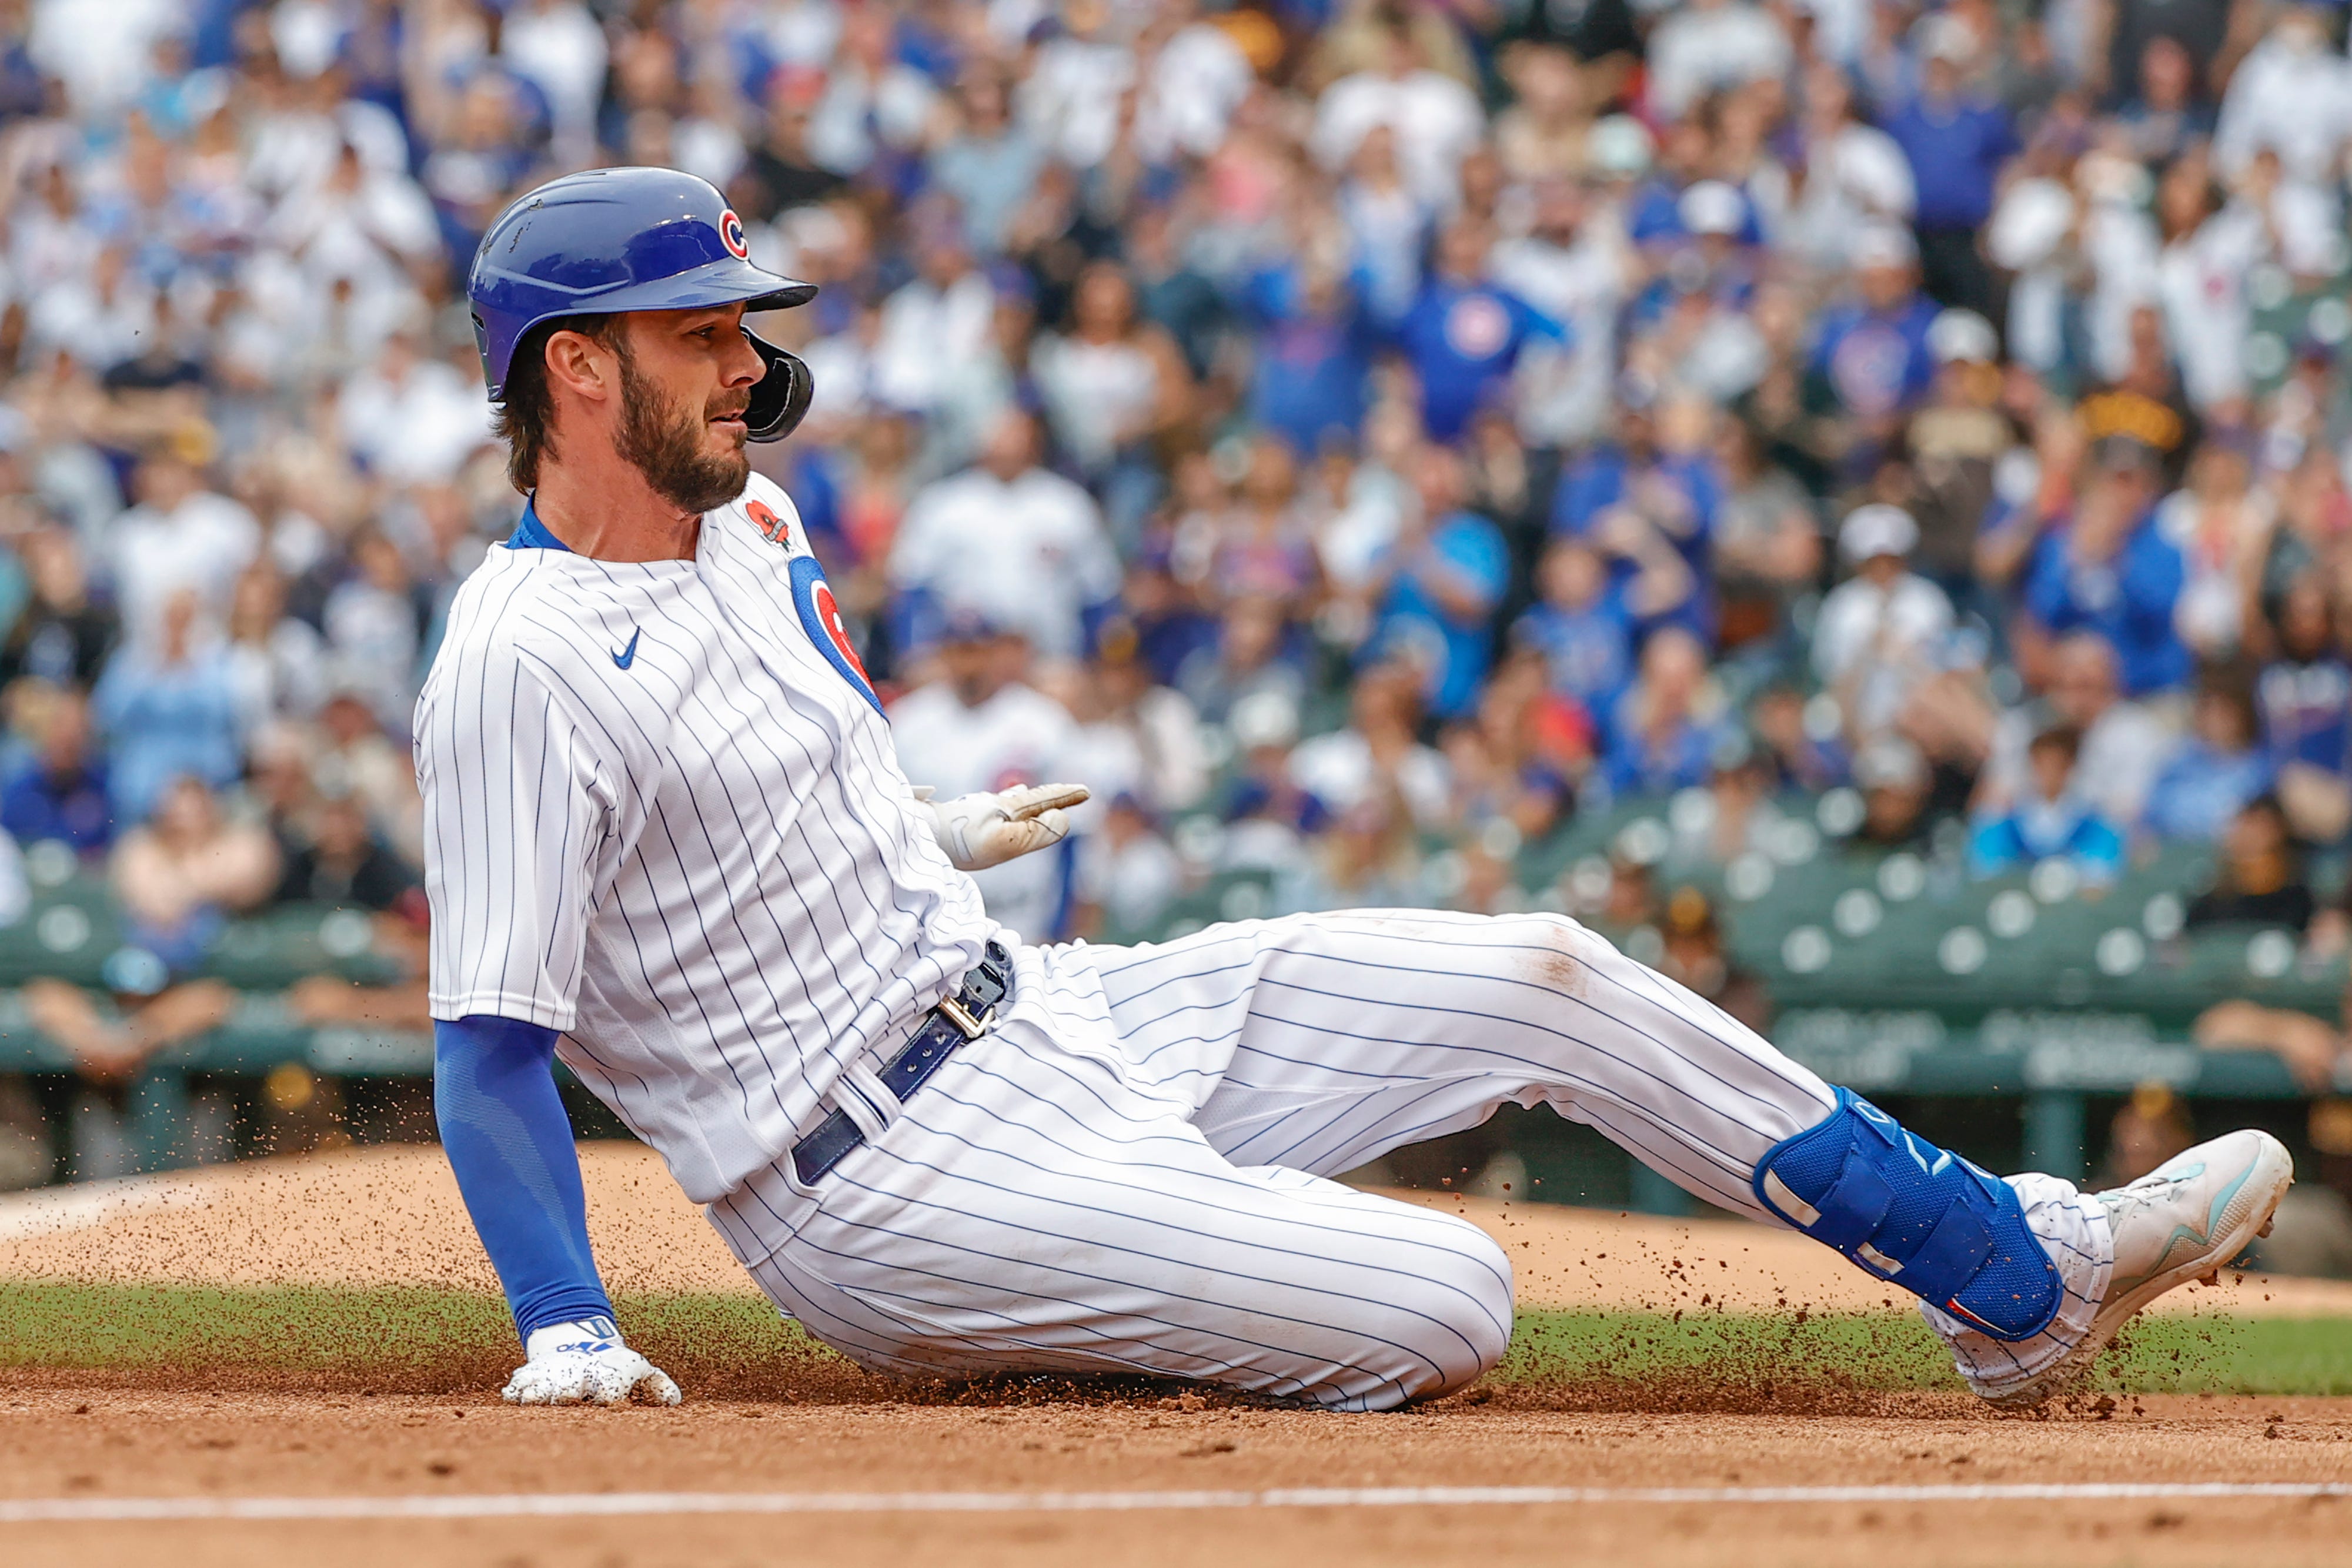 MLB Trade Deadline: Cubs' Kris Bryant proves health for suitors